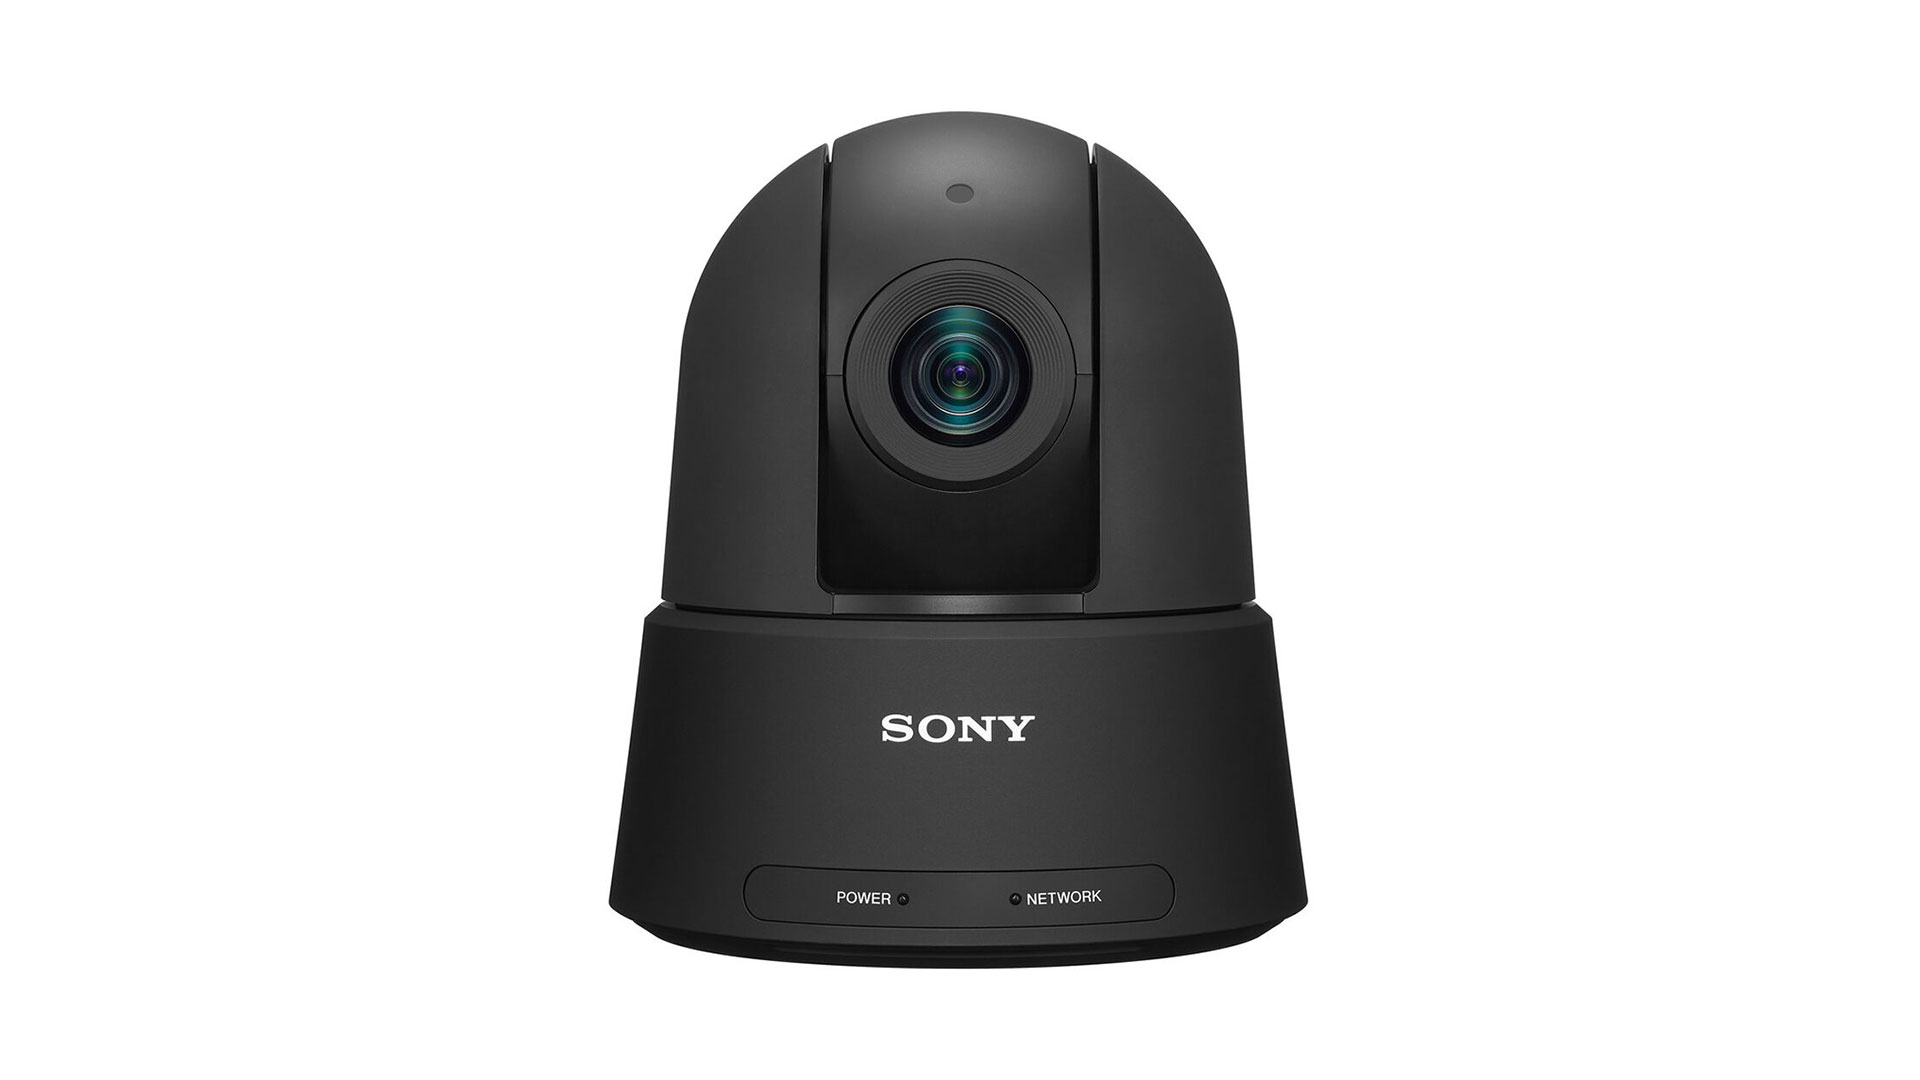 Sony SRG-A12 Launched – 4K PTZ Camera with Built-in AI Capabilities